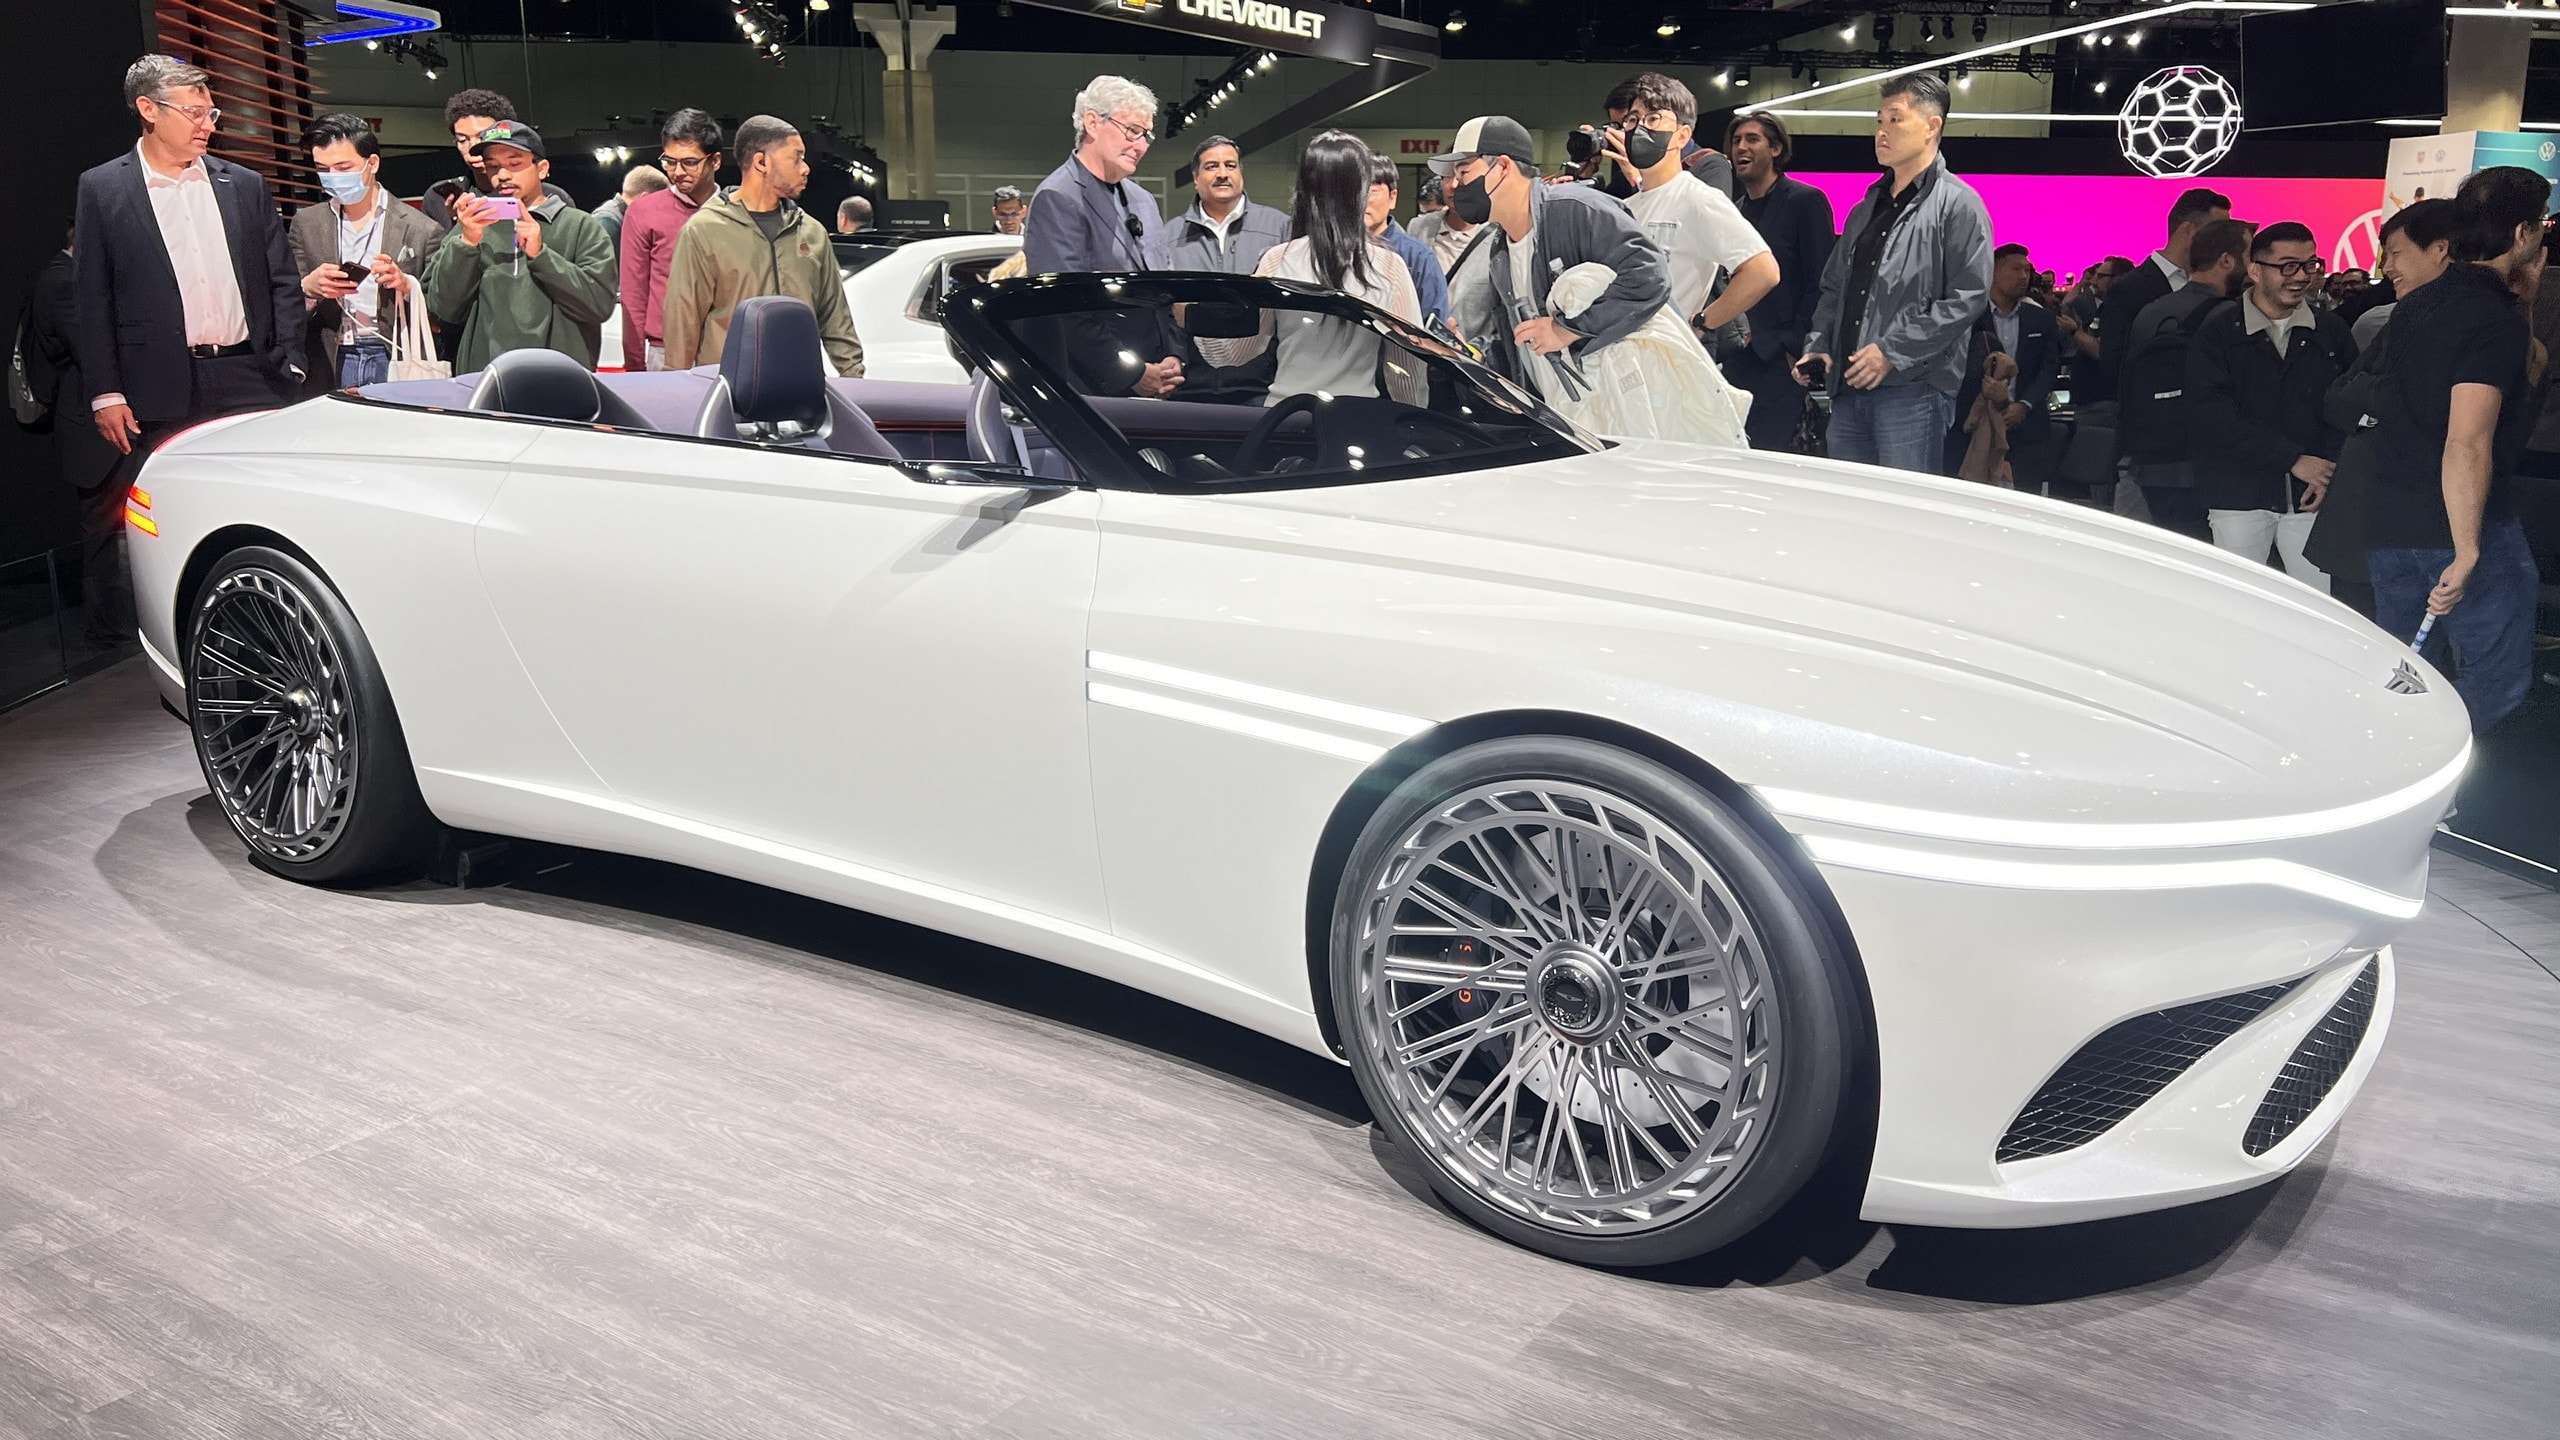 Genesis X Convertible Concept Is a Beautiful OpenTop GT That Shines in